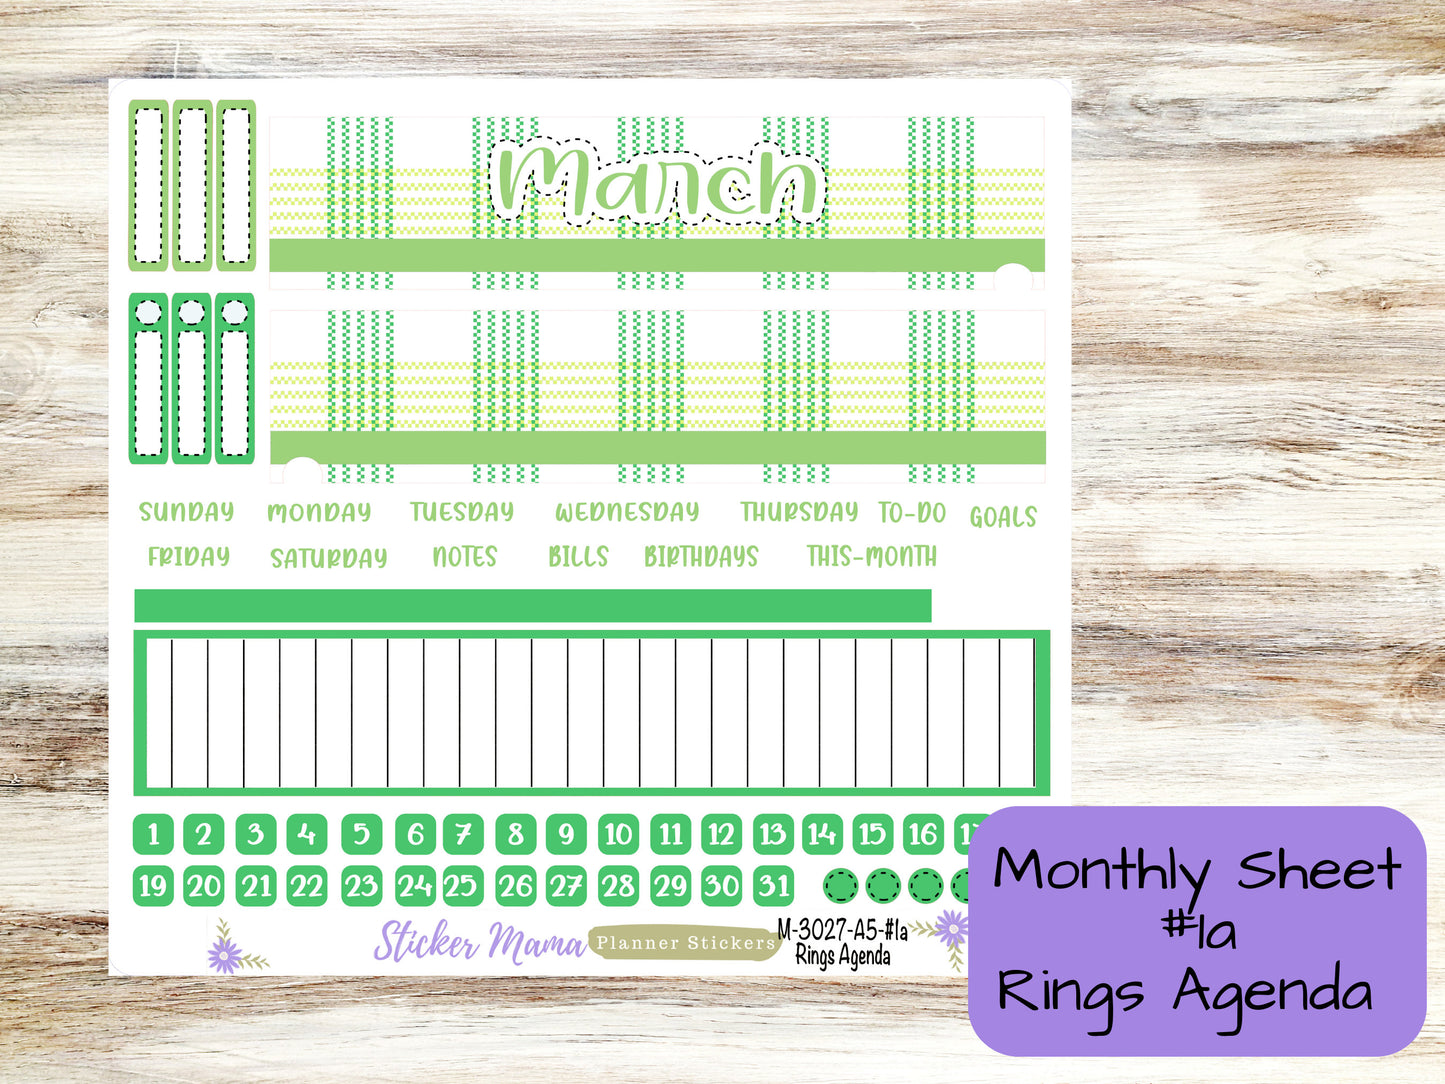 MONTHLY KIT-3027 || A5 || Lucky Irish  || - ec March Monthly Kit - March Monthly Planner Kits - Monthly Pages